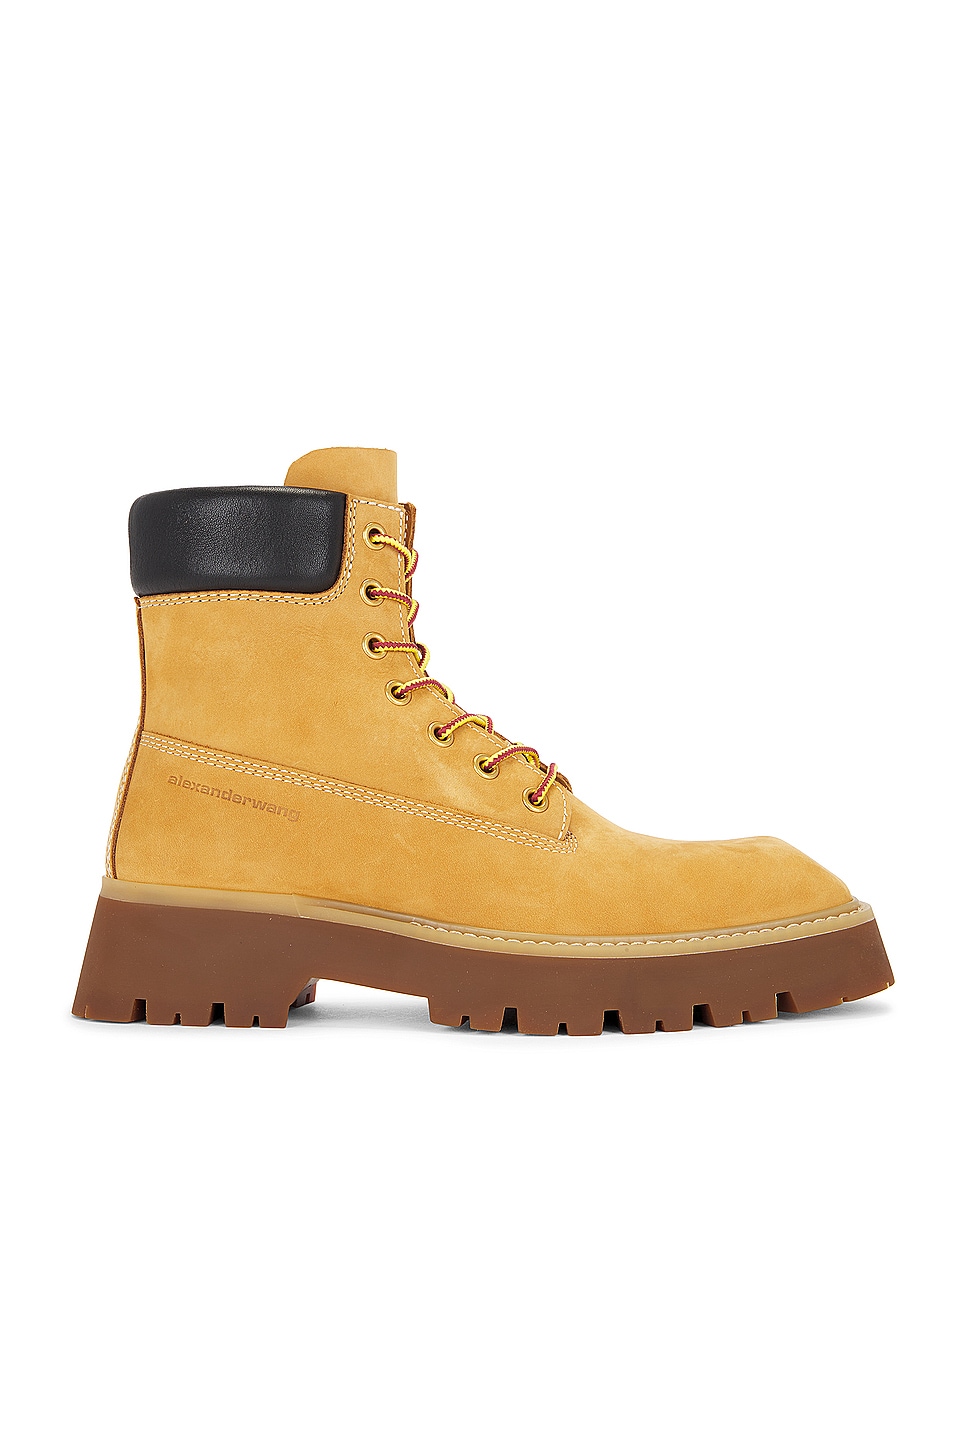 Image 1 of Alexander Wang Throttle Ankle Boot in Wheat